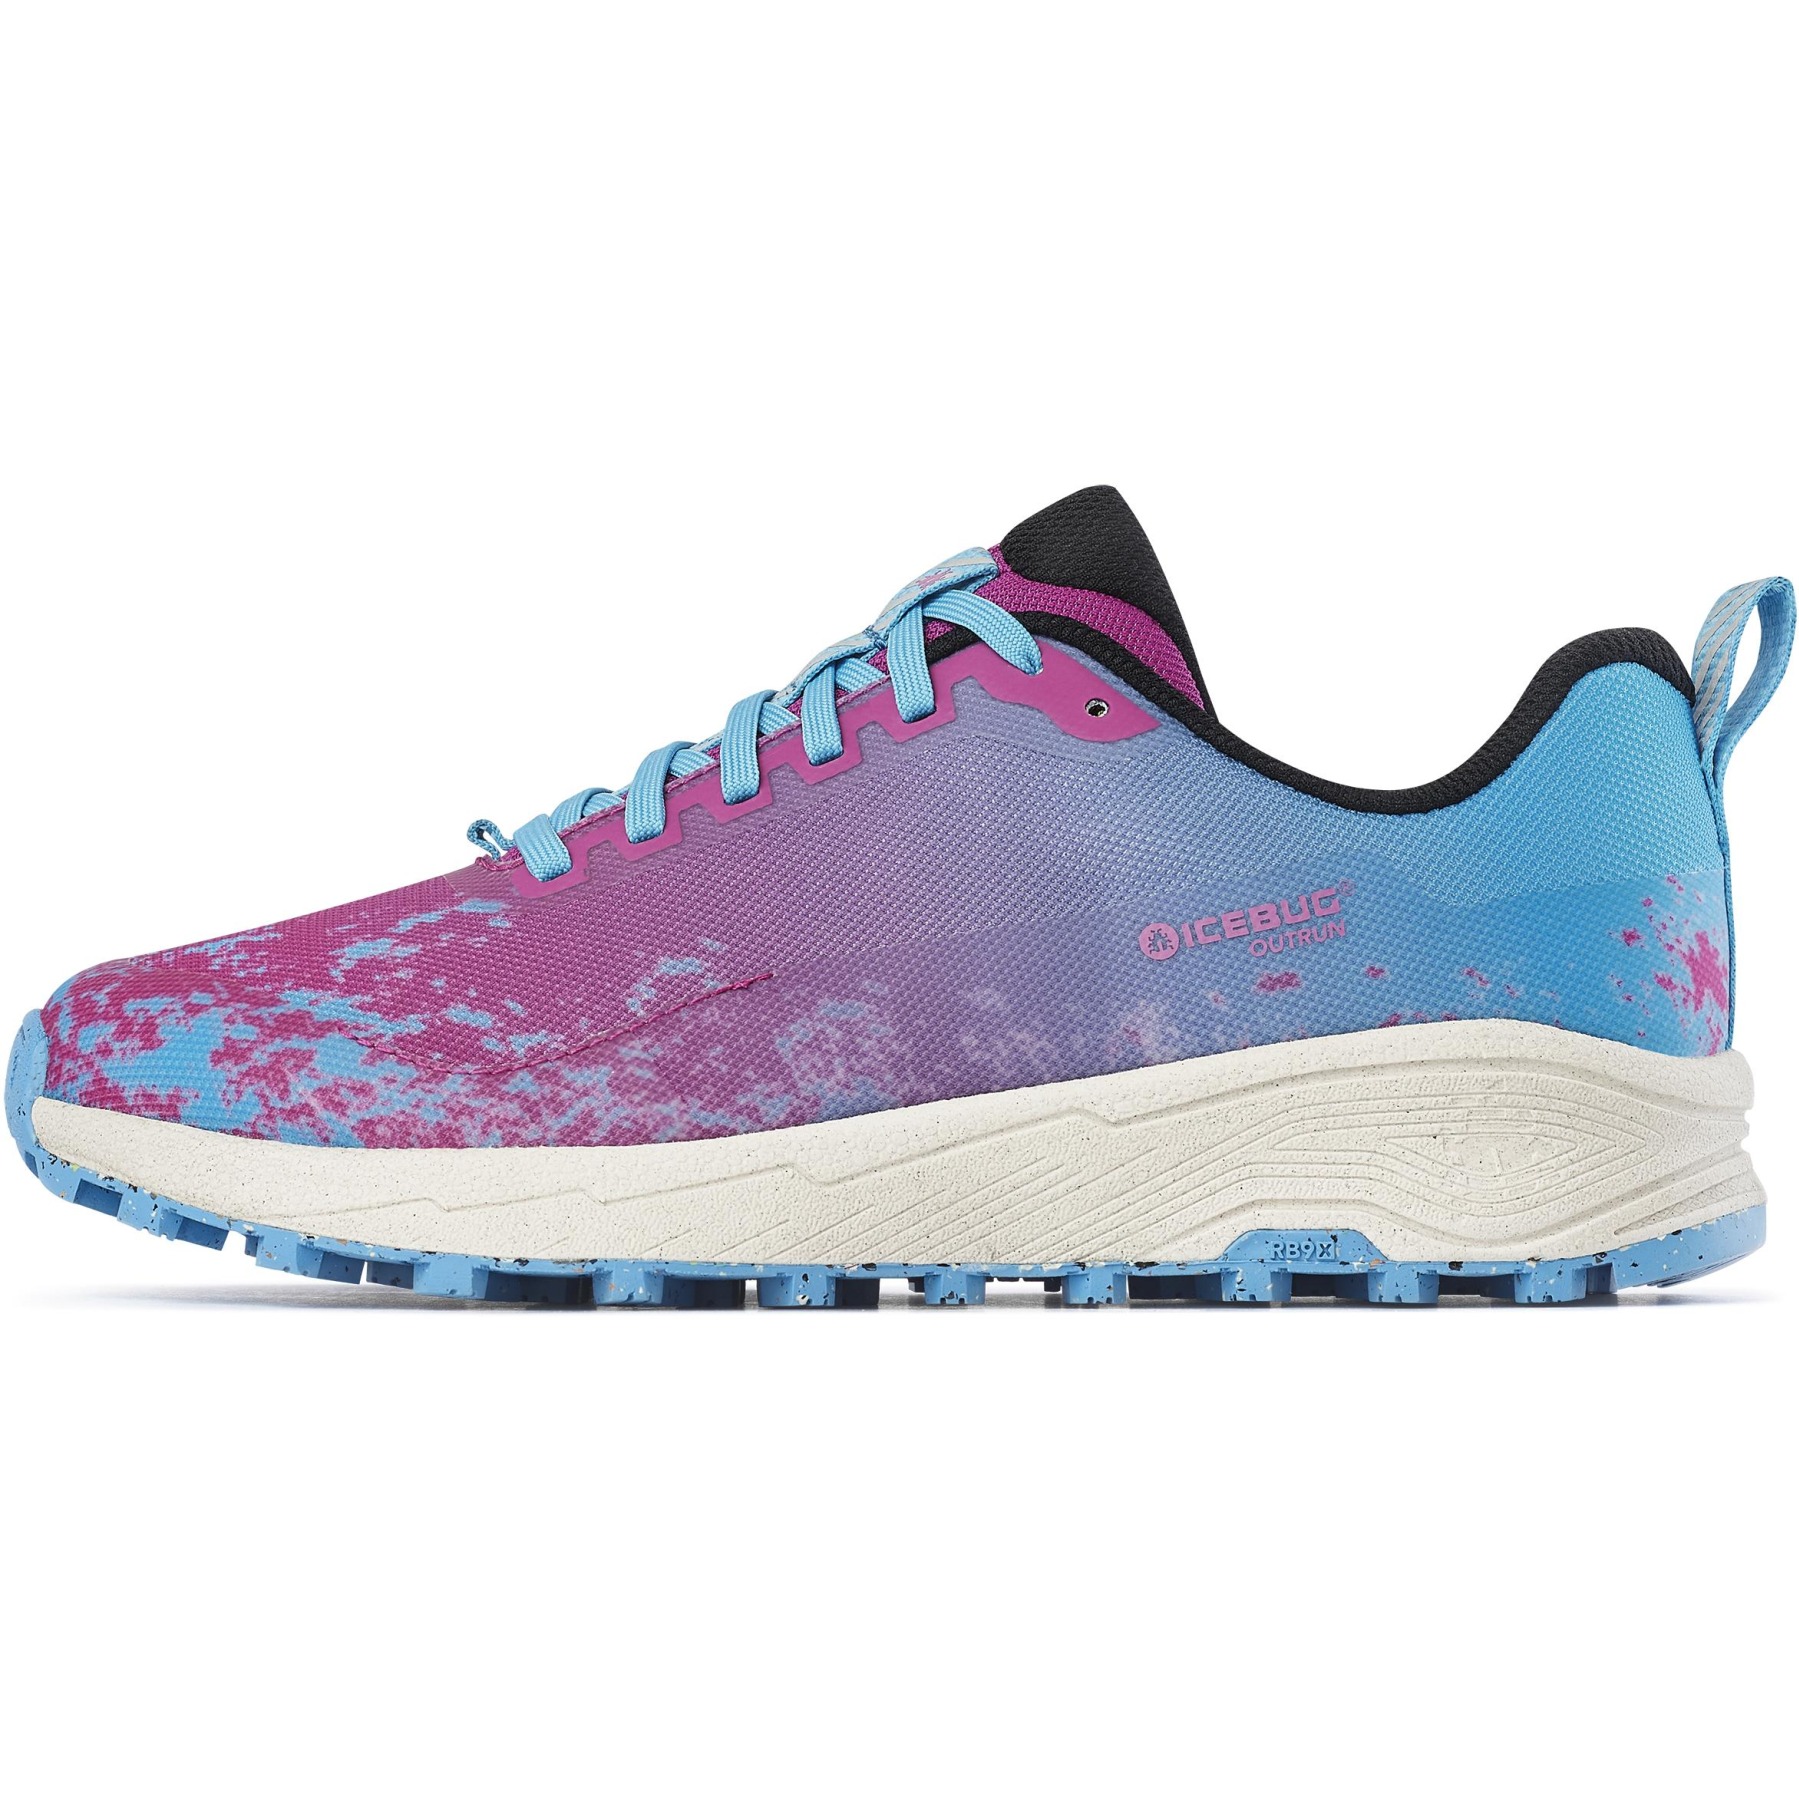 Productfoto van Icebug OutRun W RB9X Women&#039;s Shoes - sky blue/orchid